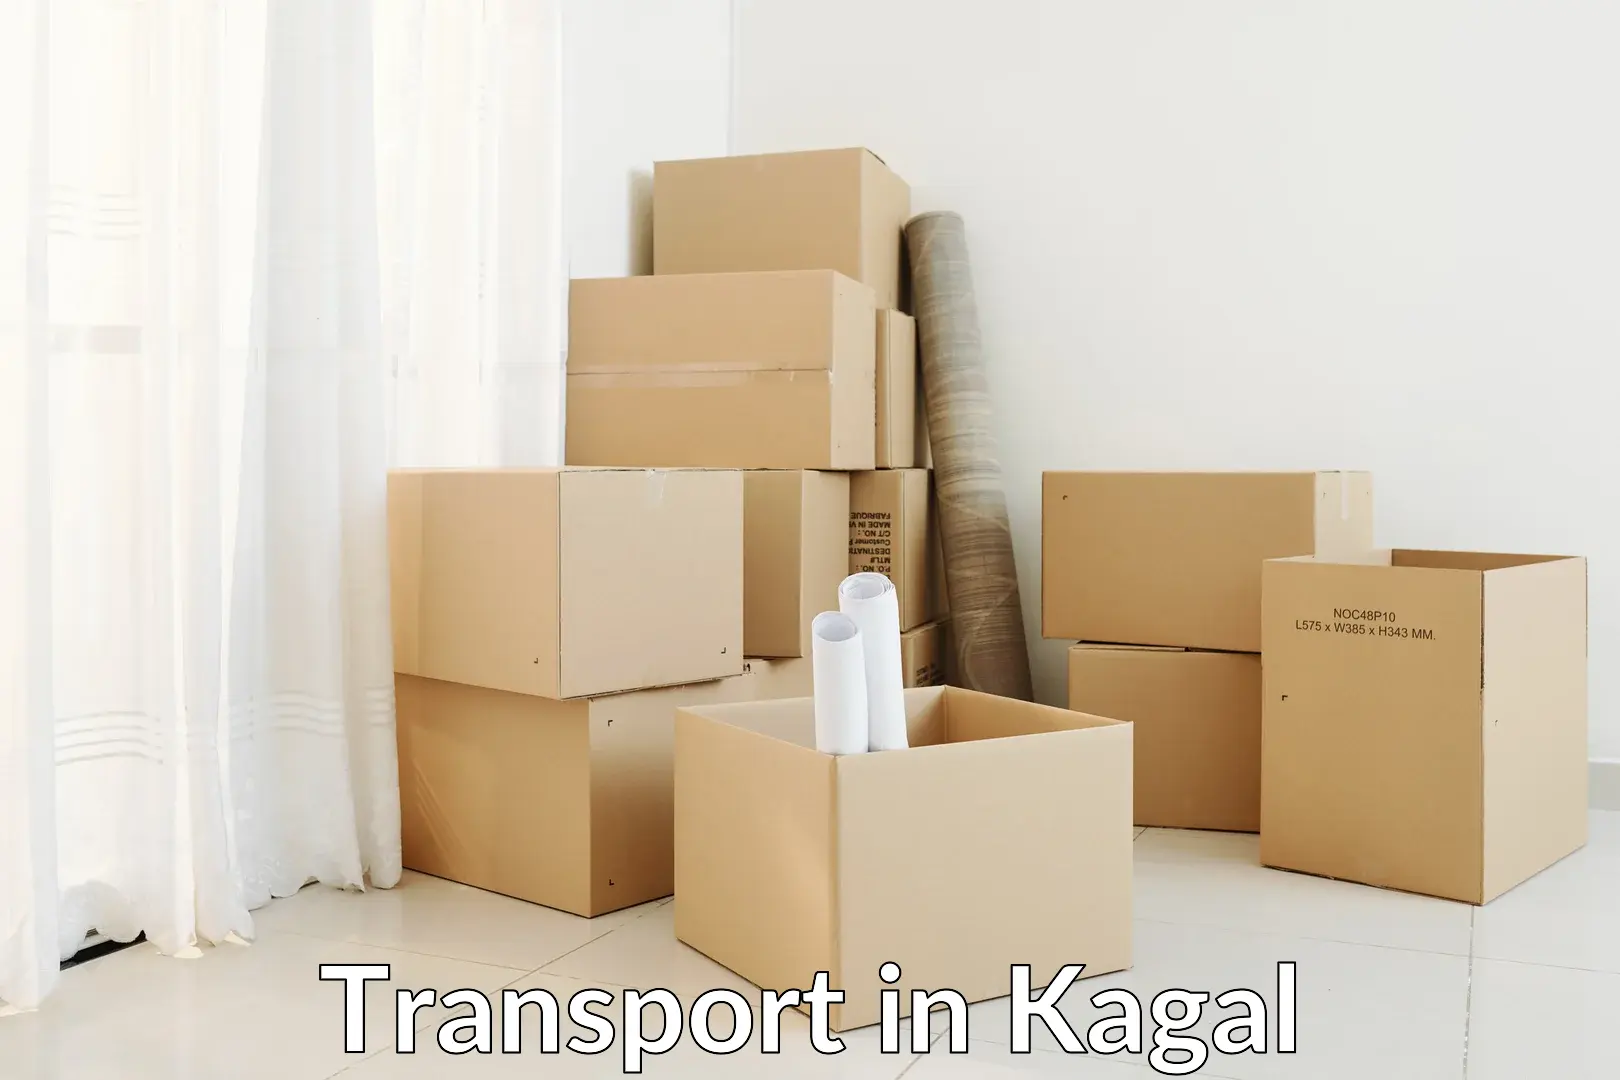 Vehicle transport services in Kagal